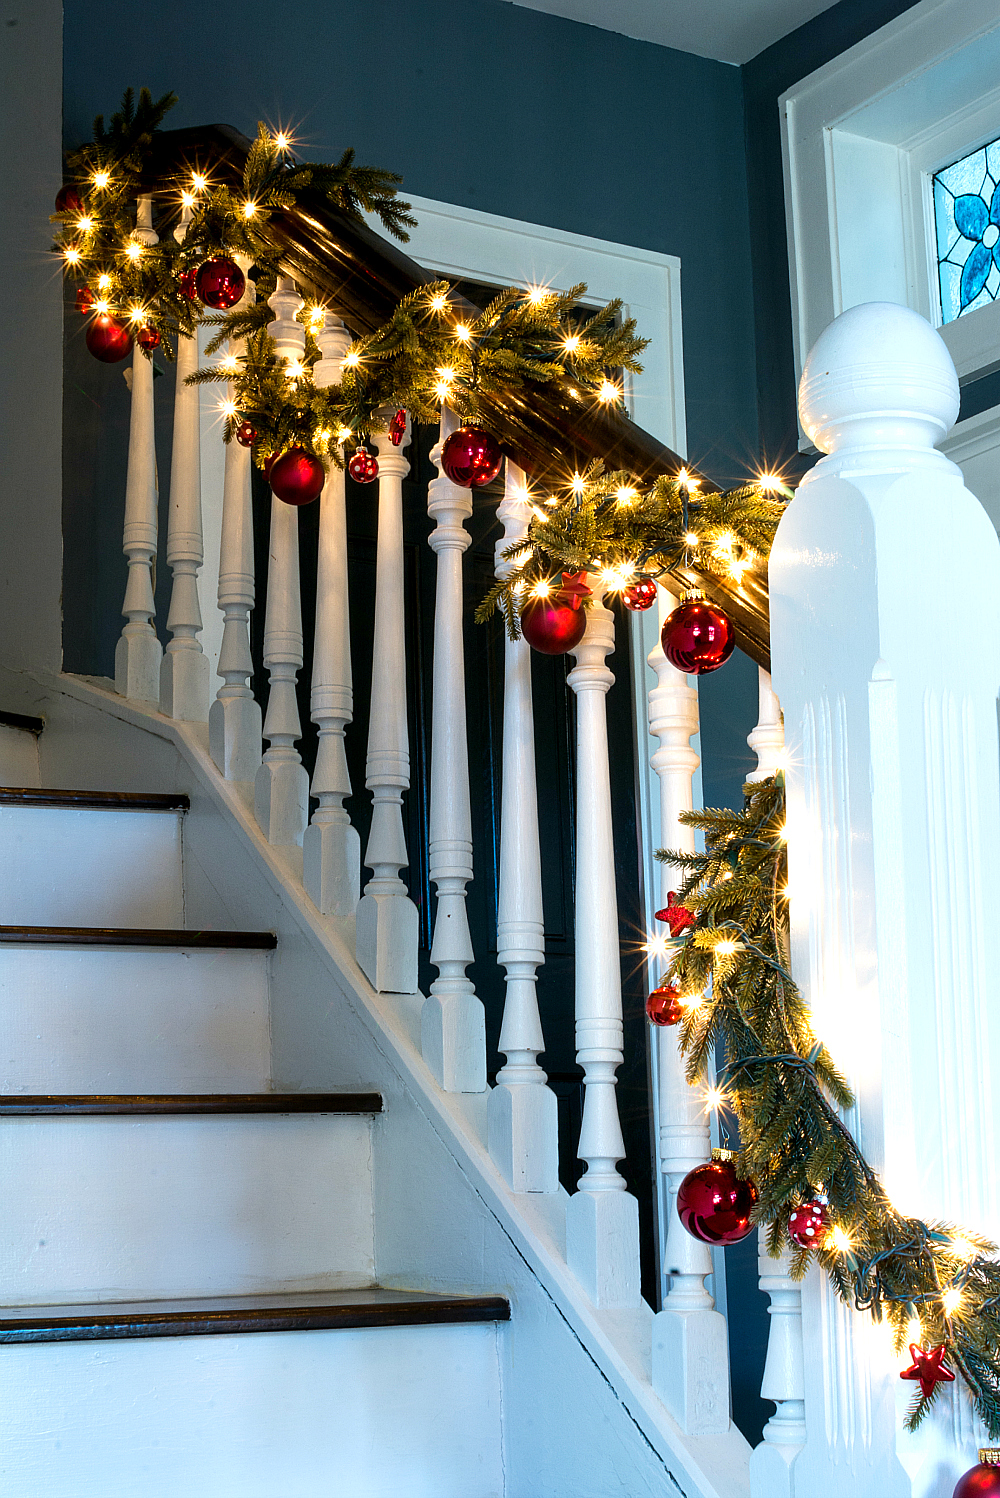 How To Decorate Garland with Ornaments